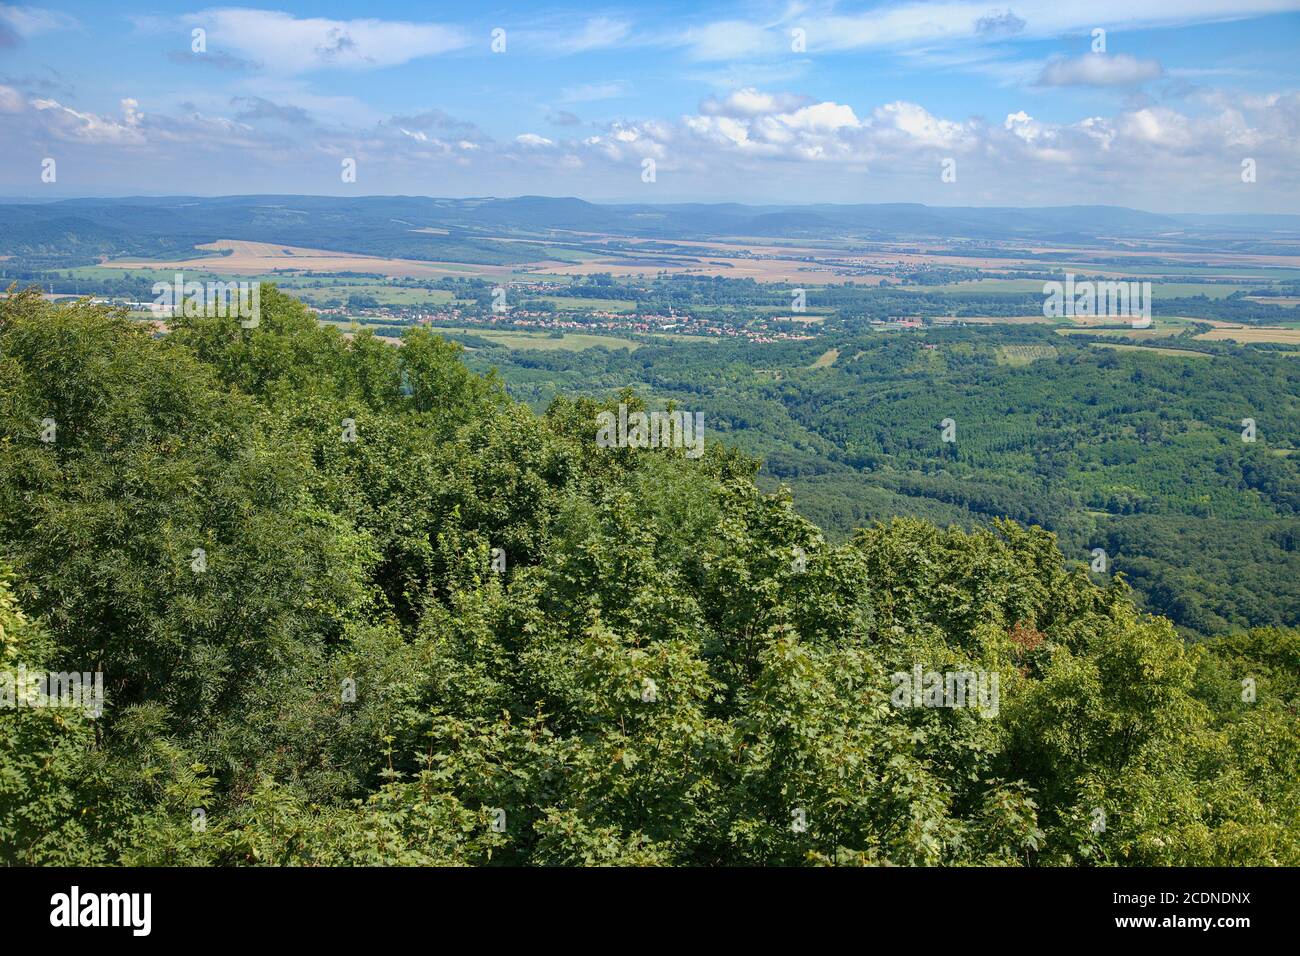 View from Drégely castle onto the flatlands with some small hills in the distant horizont, Hungary Stock Photo